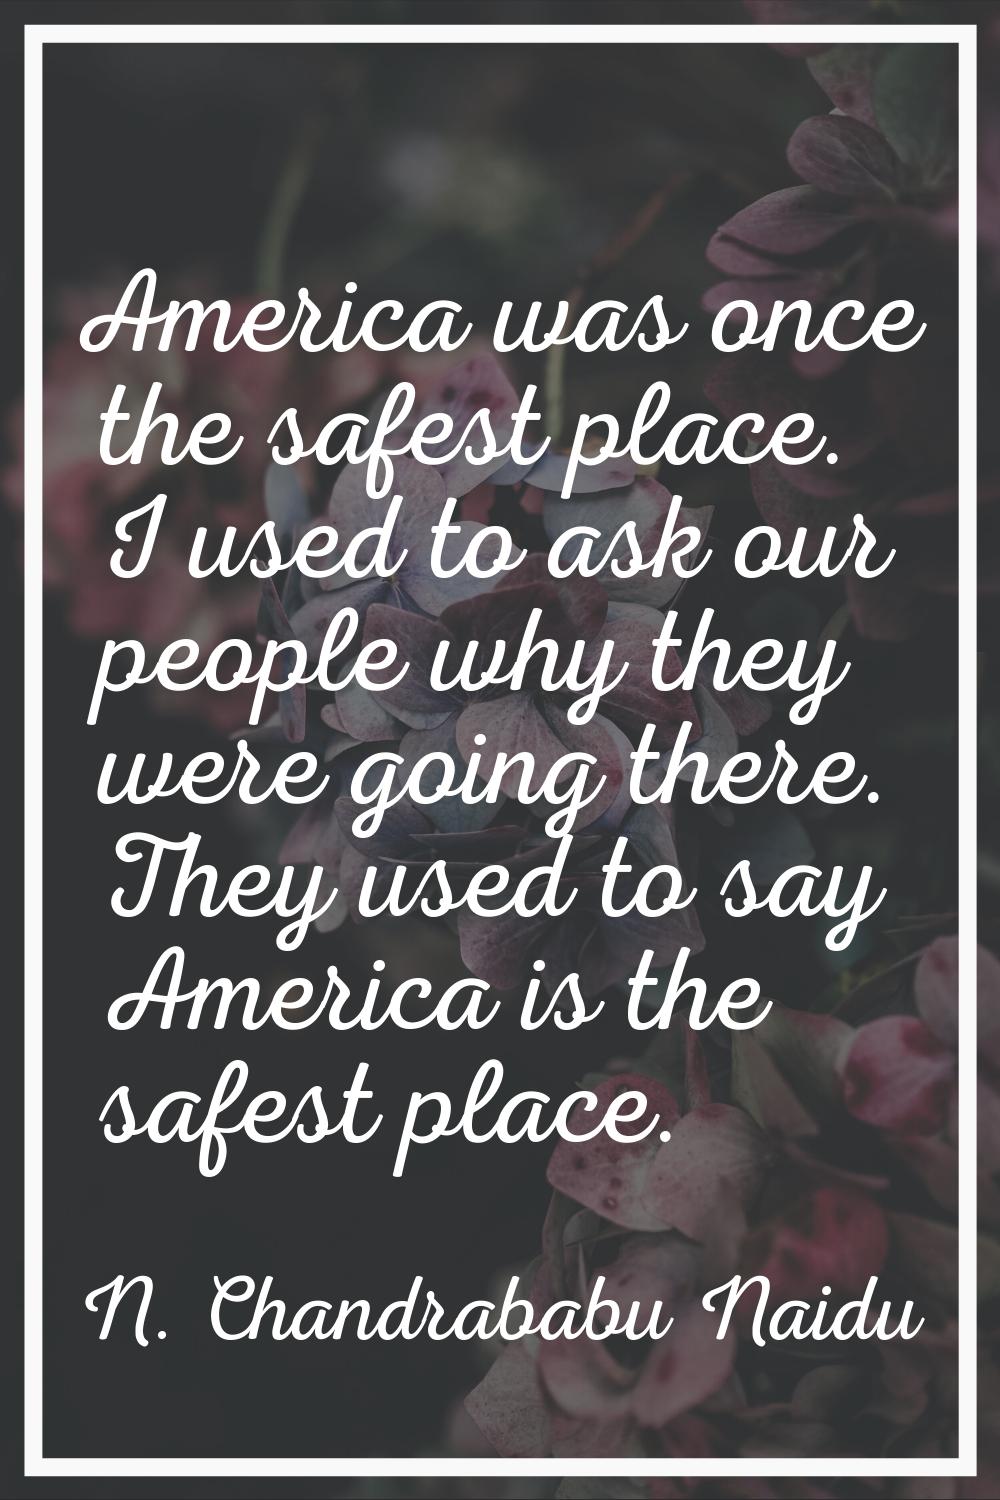 America was once the safest place. I used to ask our people why they were going there. They used to